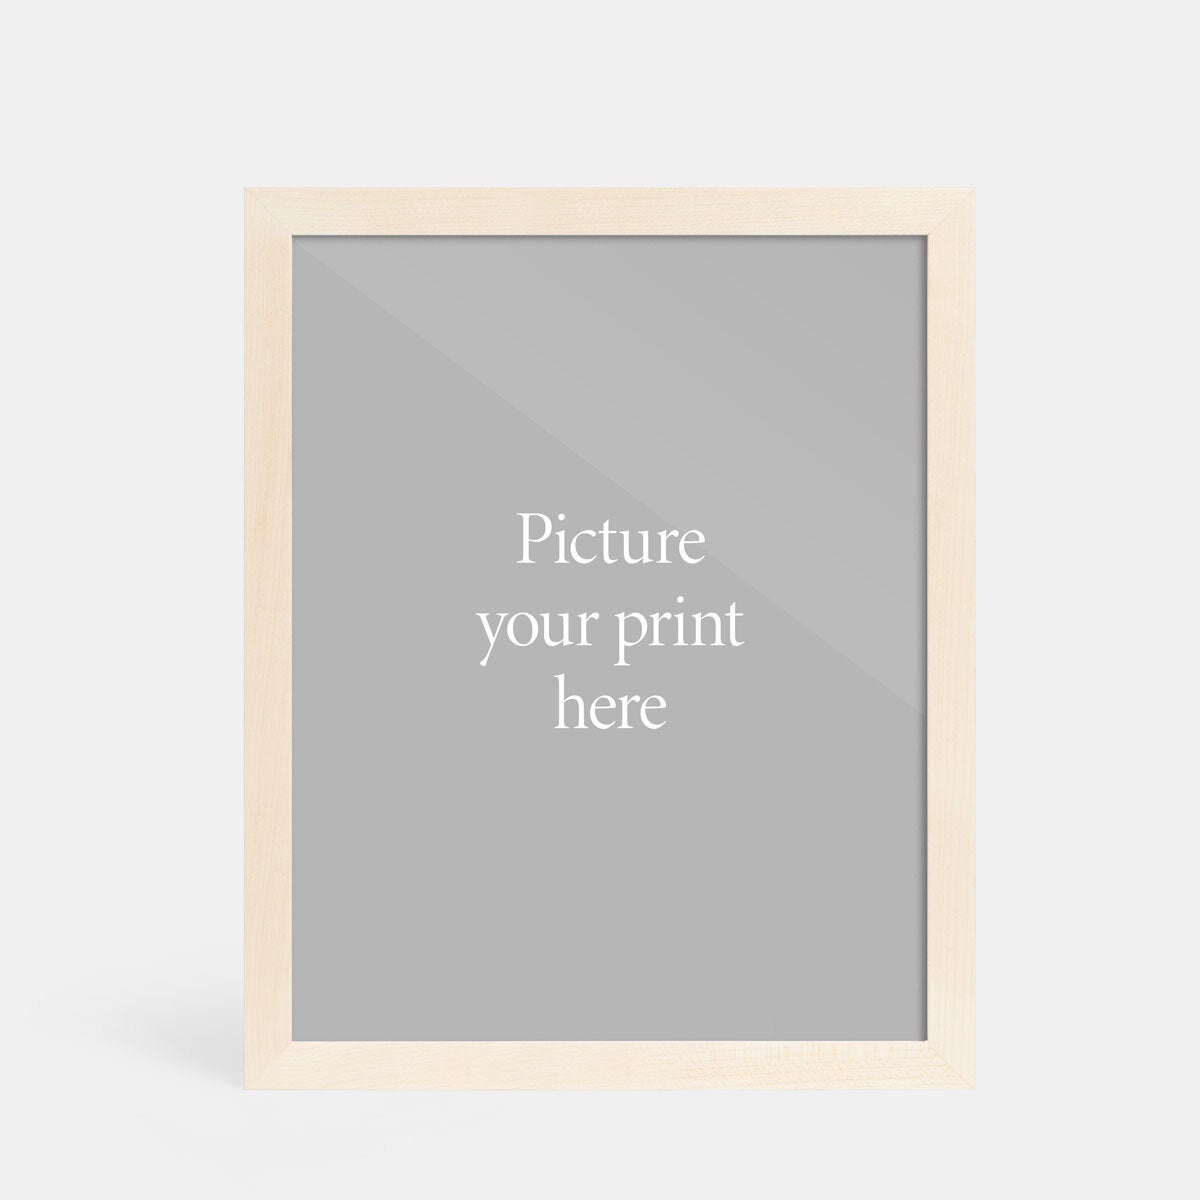 Gallery Frame Without Print